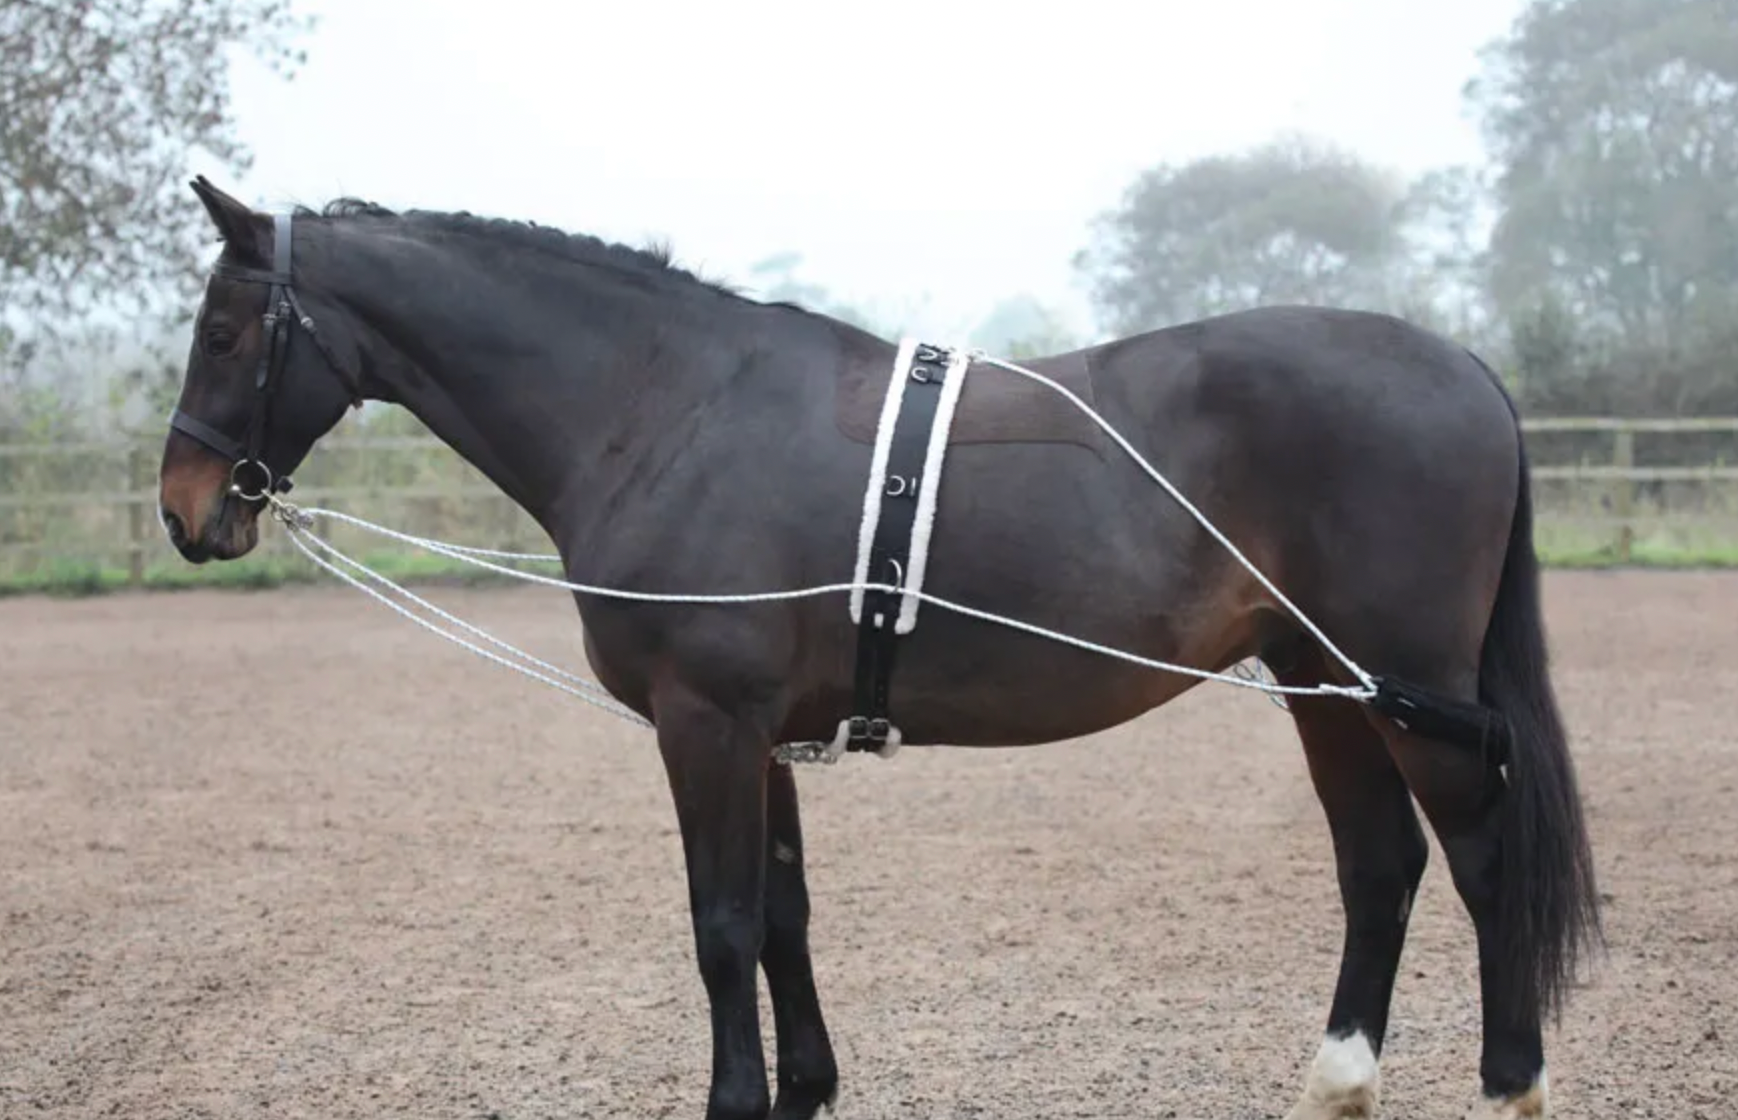 Shires Lunging Aid